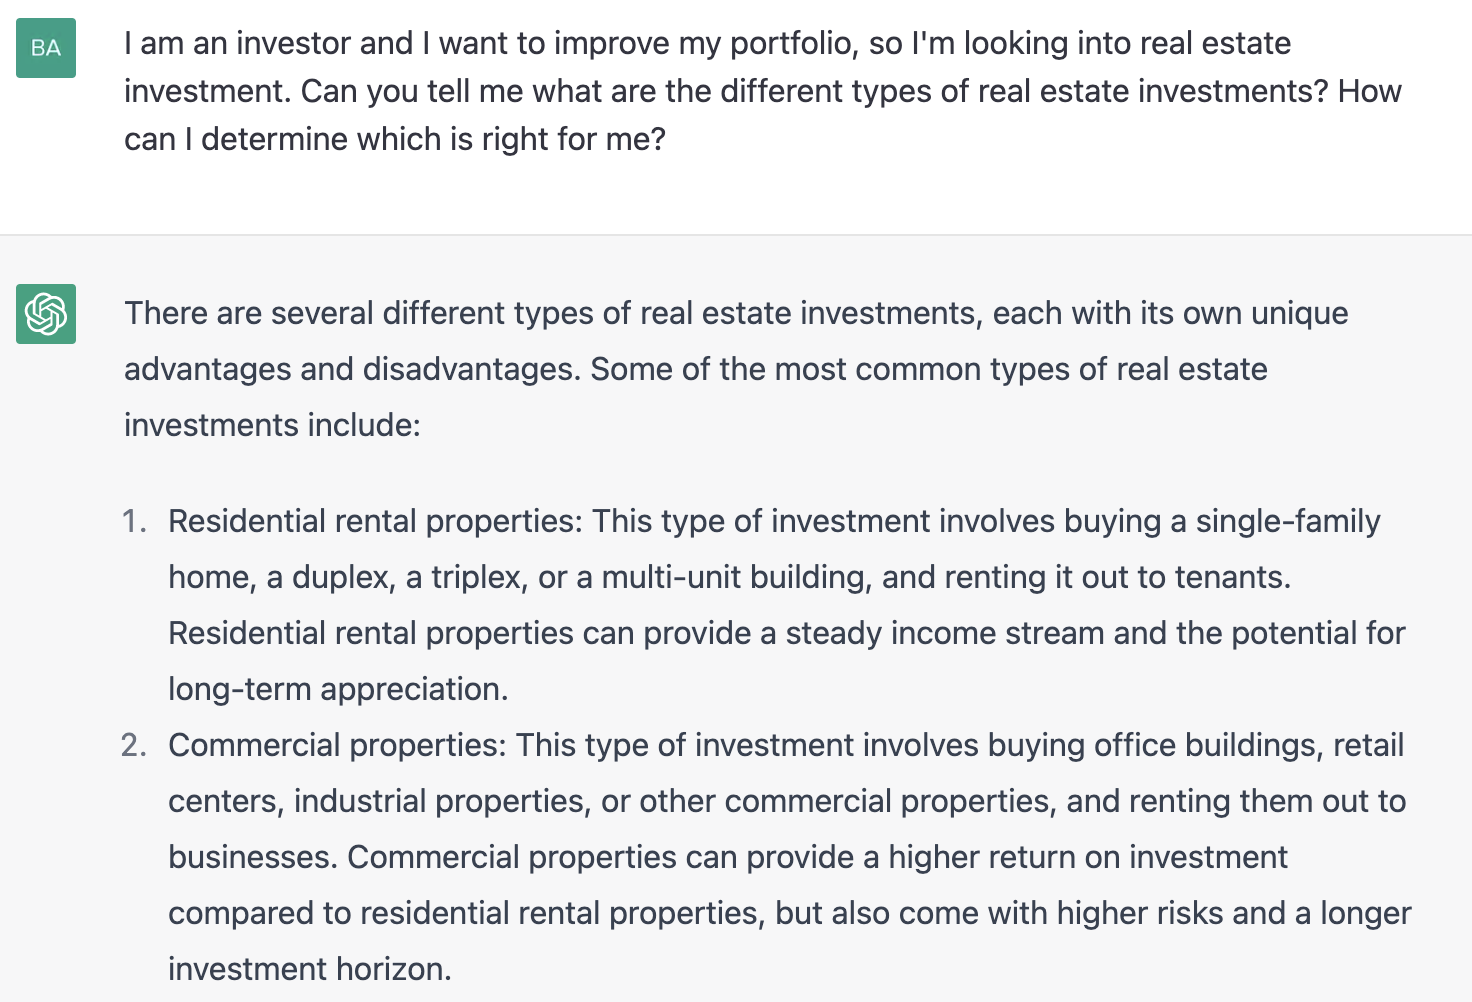 ChatGPT prompt about the different types of real estate investments